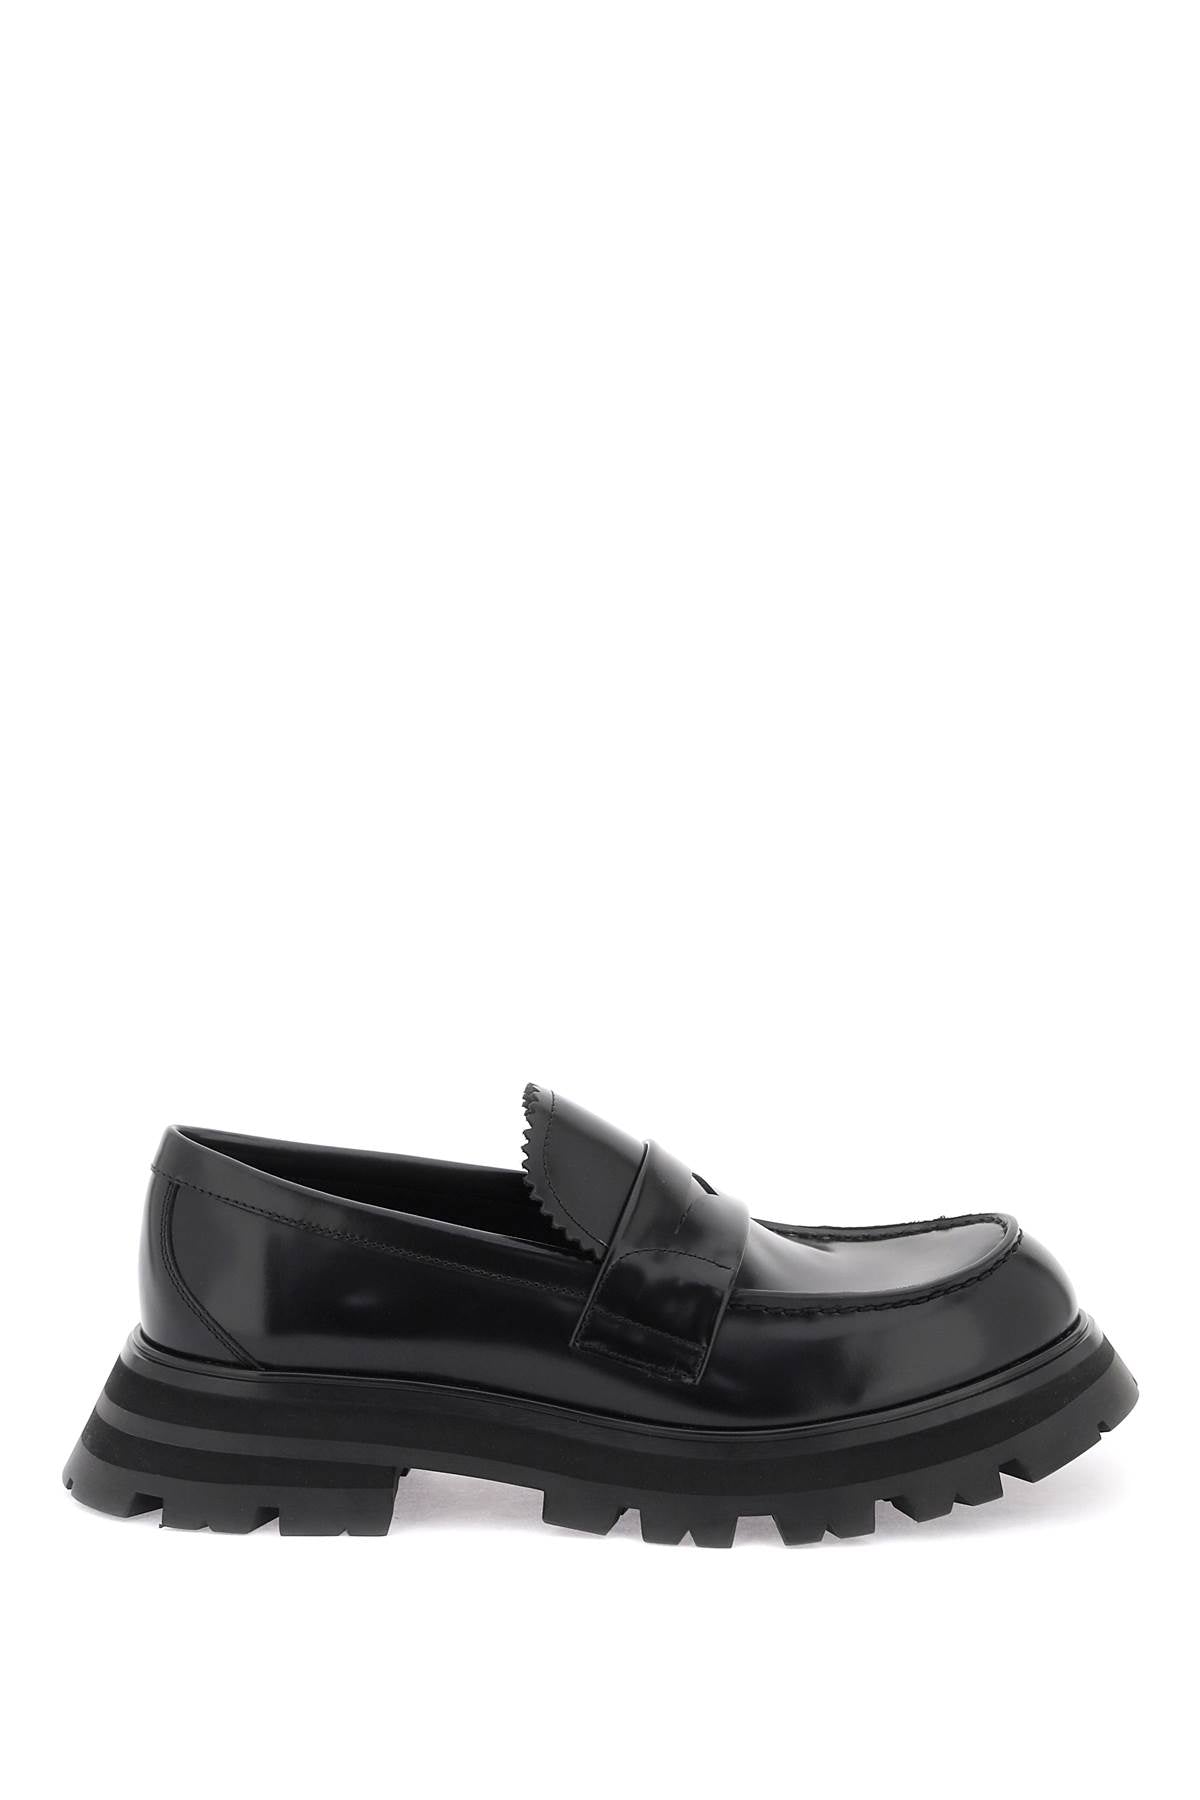 Alexander Mcqueen Sophisticated And Edgy Brushed Leather Loafers For Women In Black